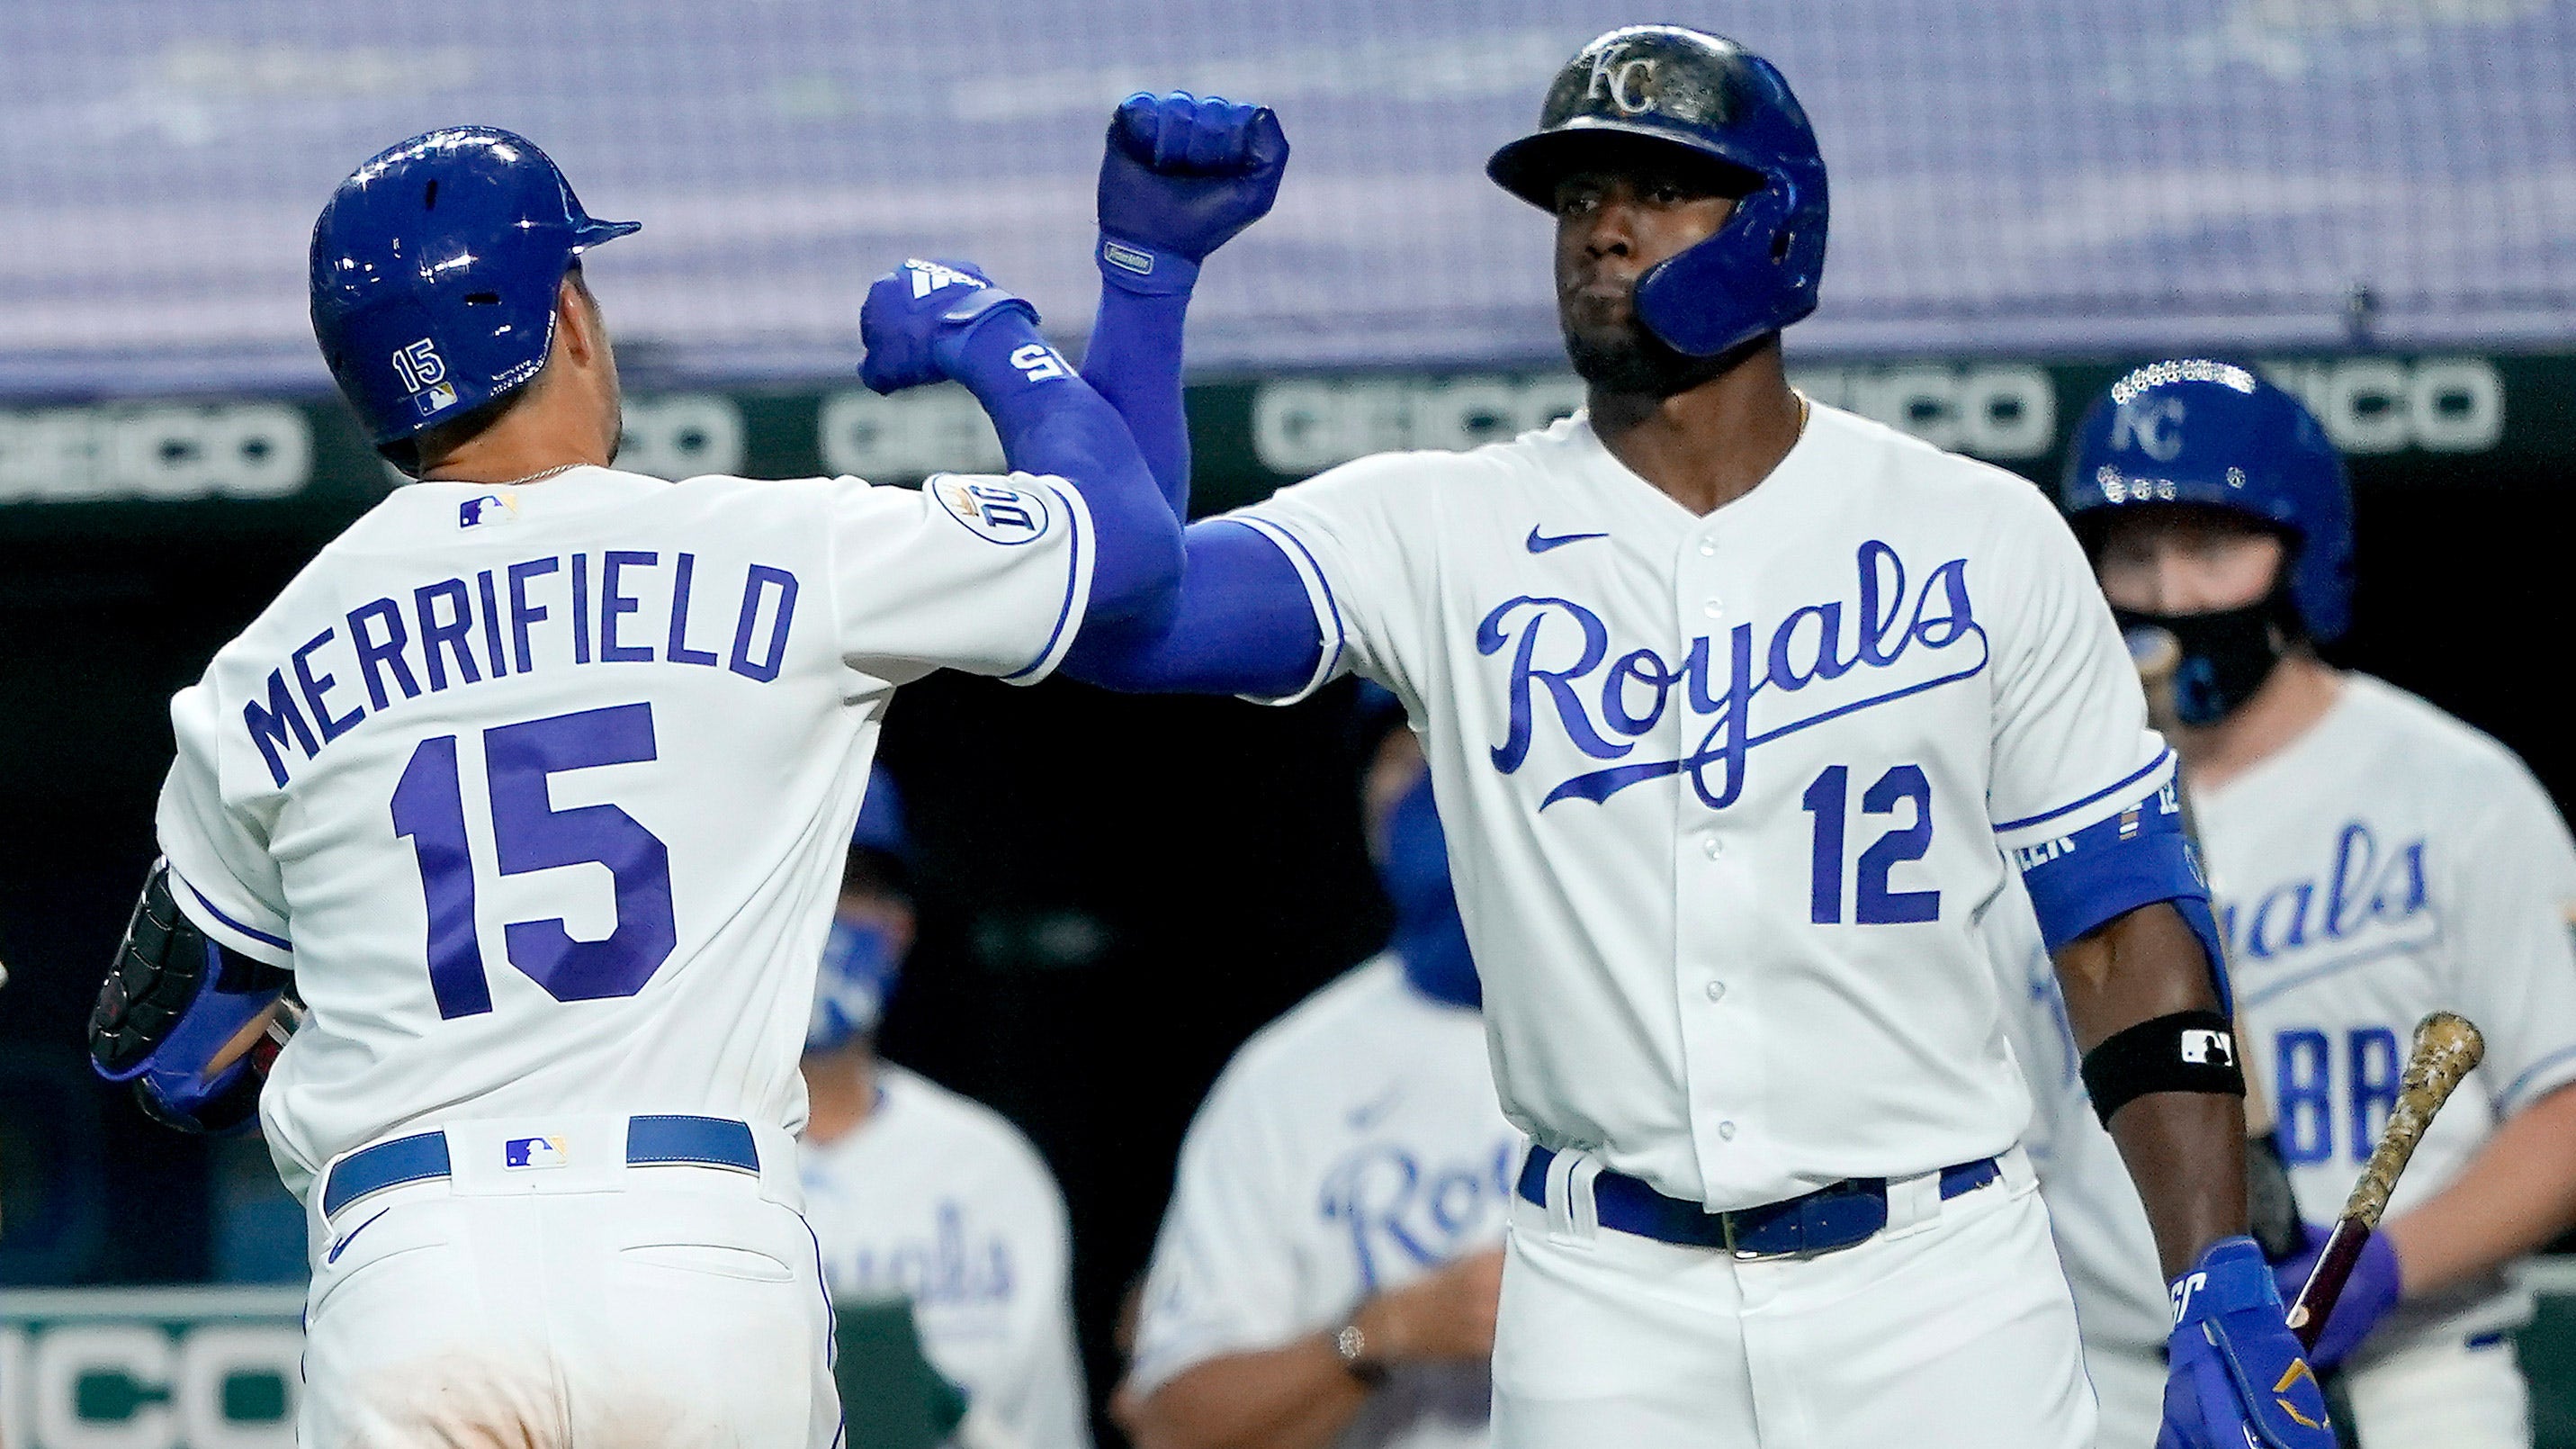 Merrifield on the Royals’ lack of timely hits FOX Sports